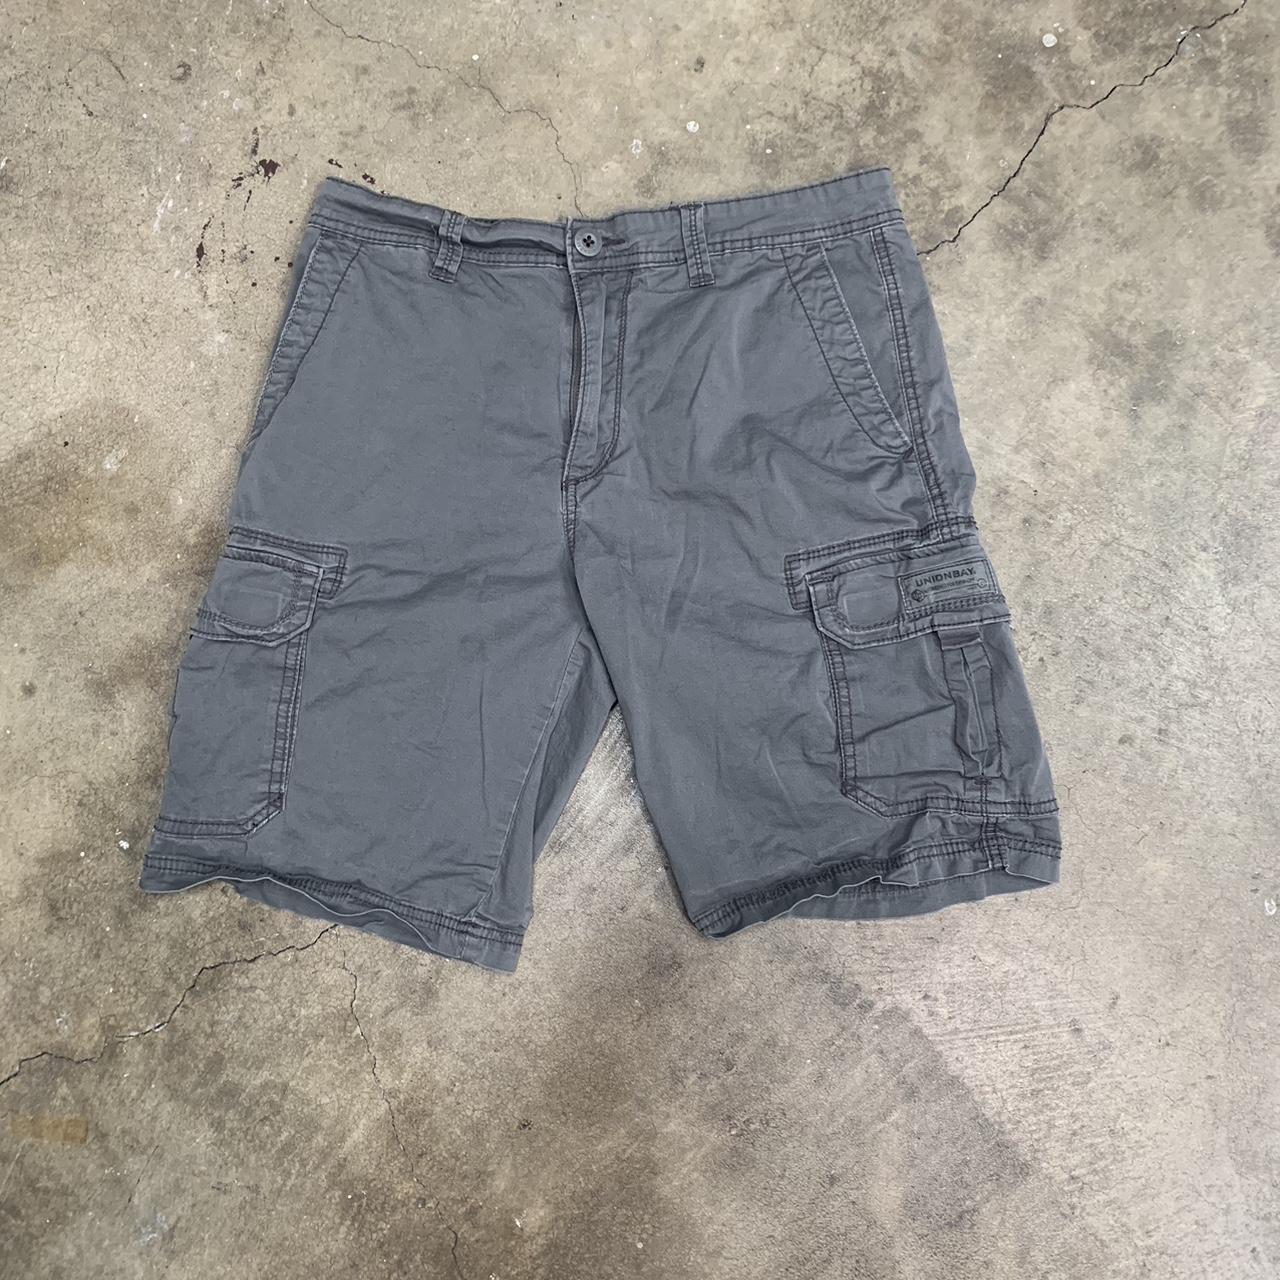 Union bay shorts in good condition A bit... - Depop